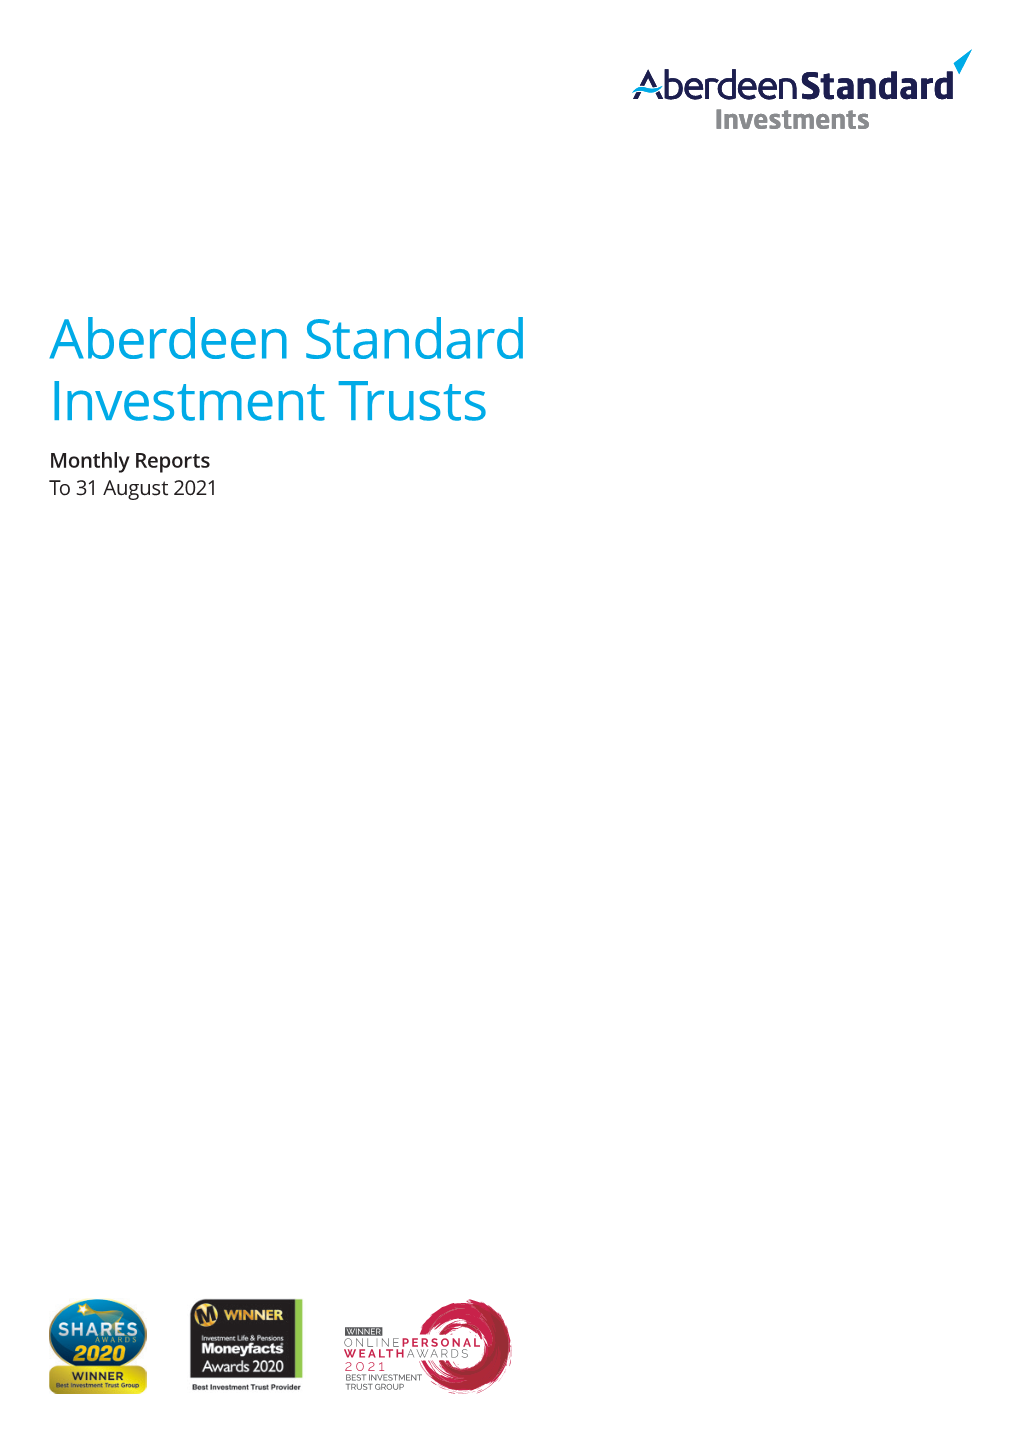 Aberdeen Standard Investment Trusts Monthly Reports to 31 August 2021